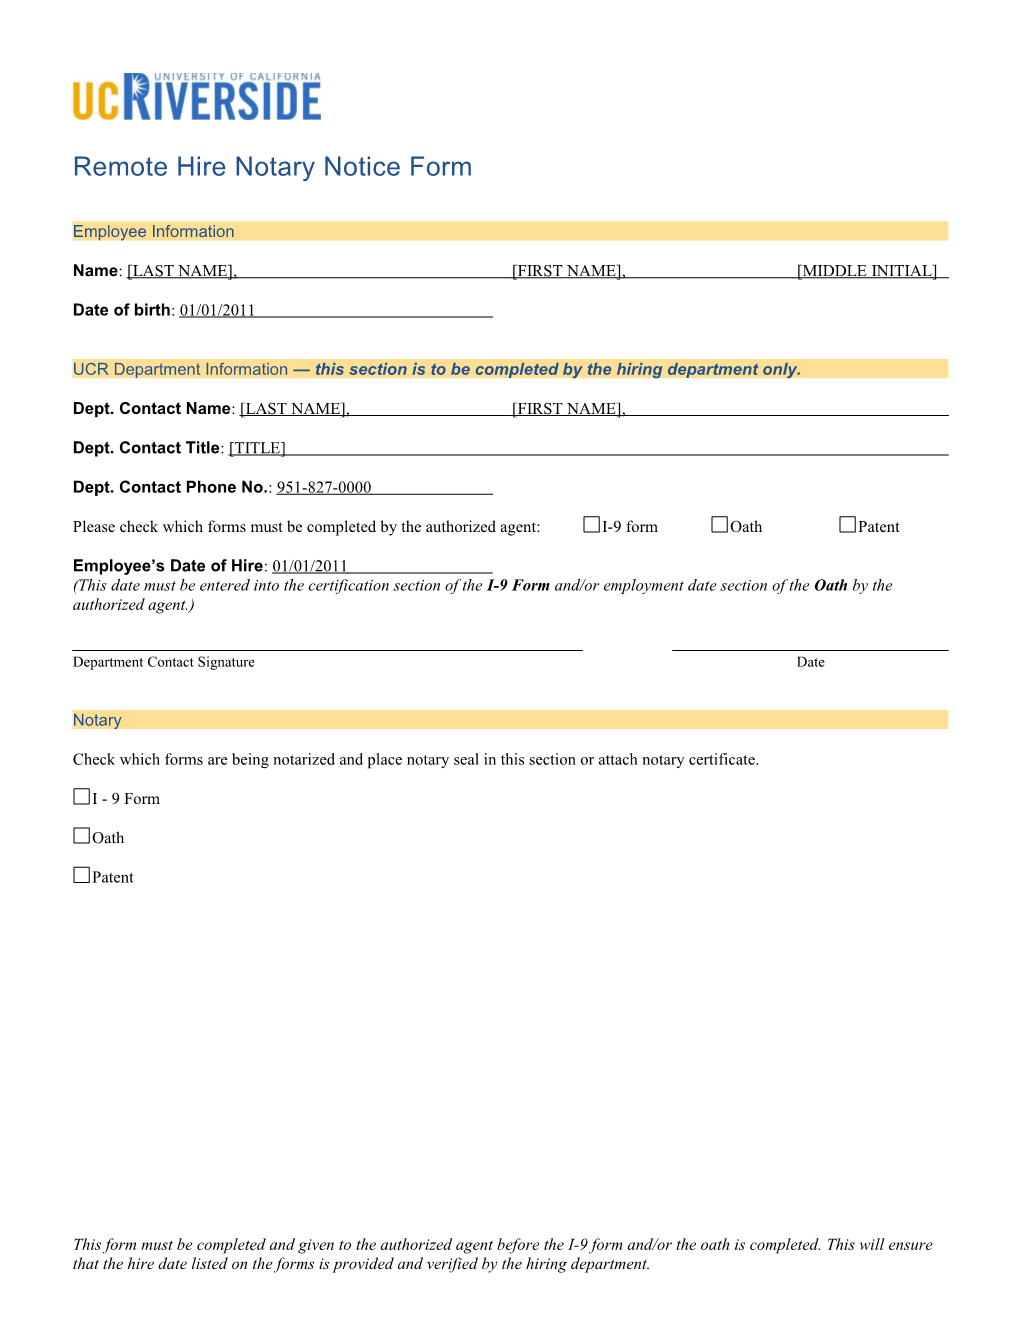 Remote Hire Notary Notice Form Instruction Sheet